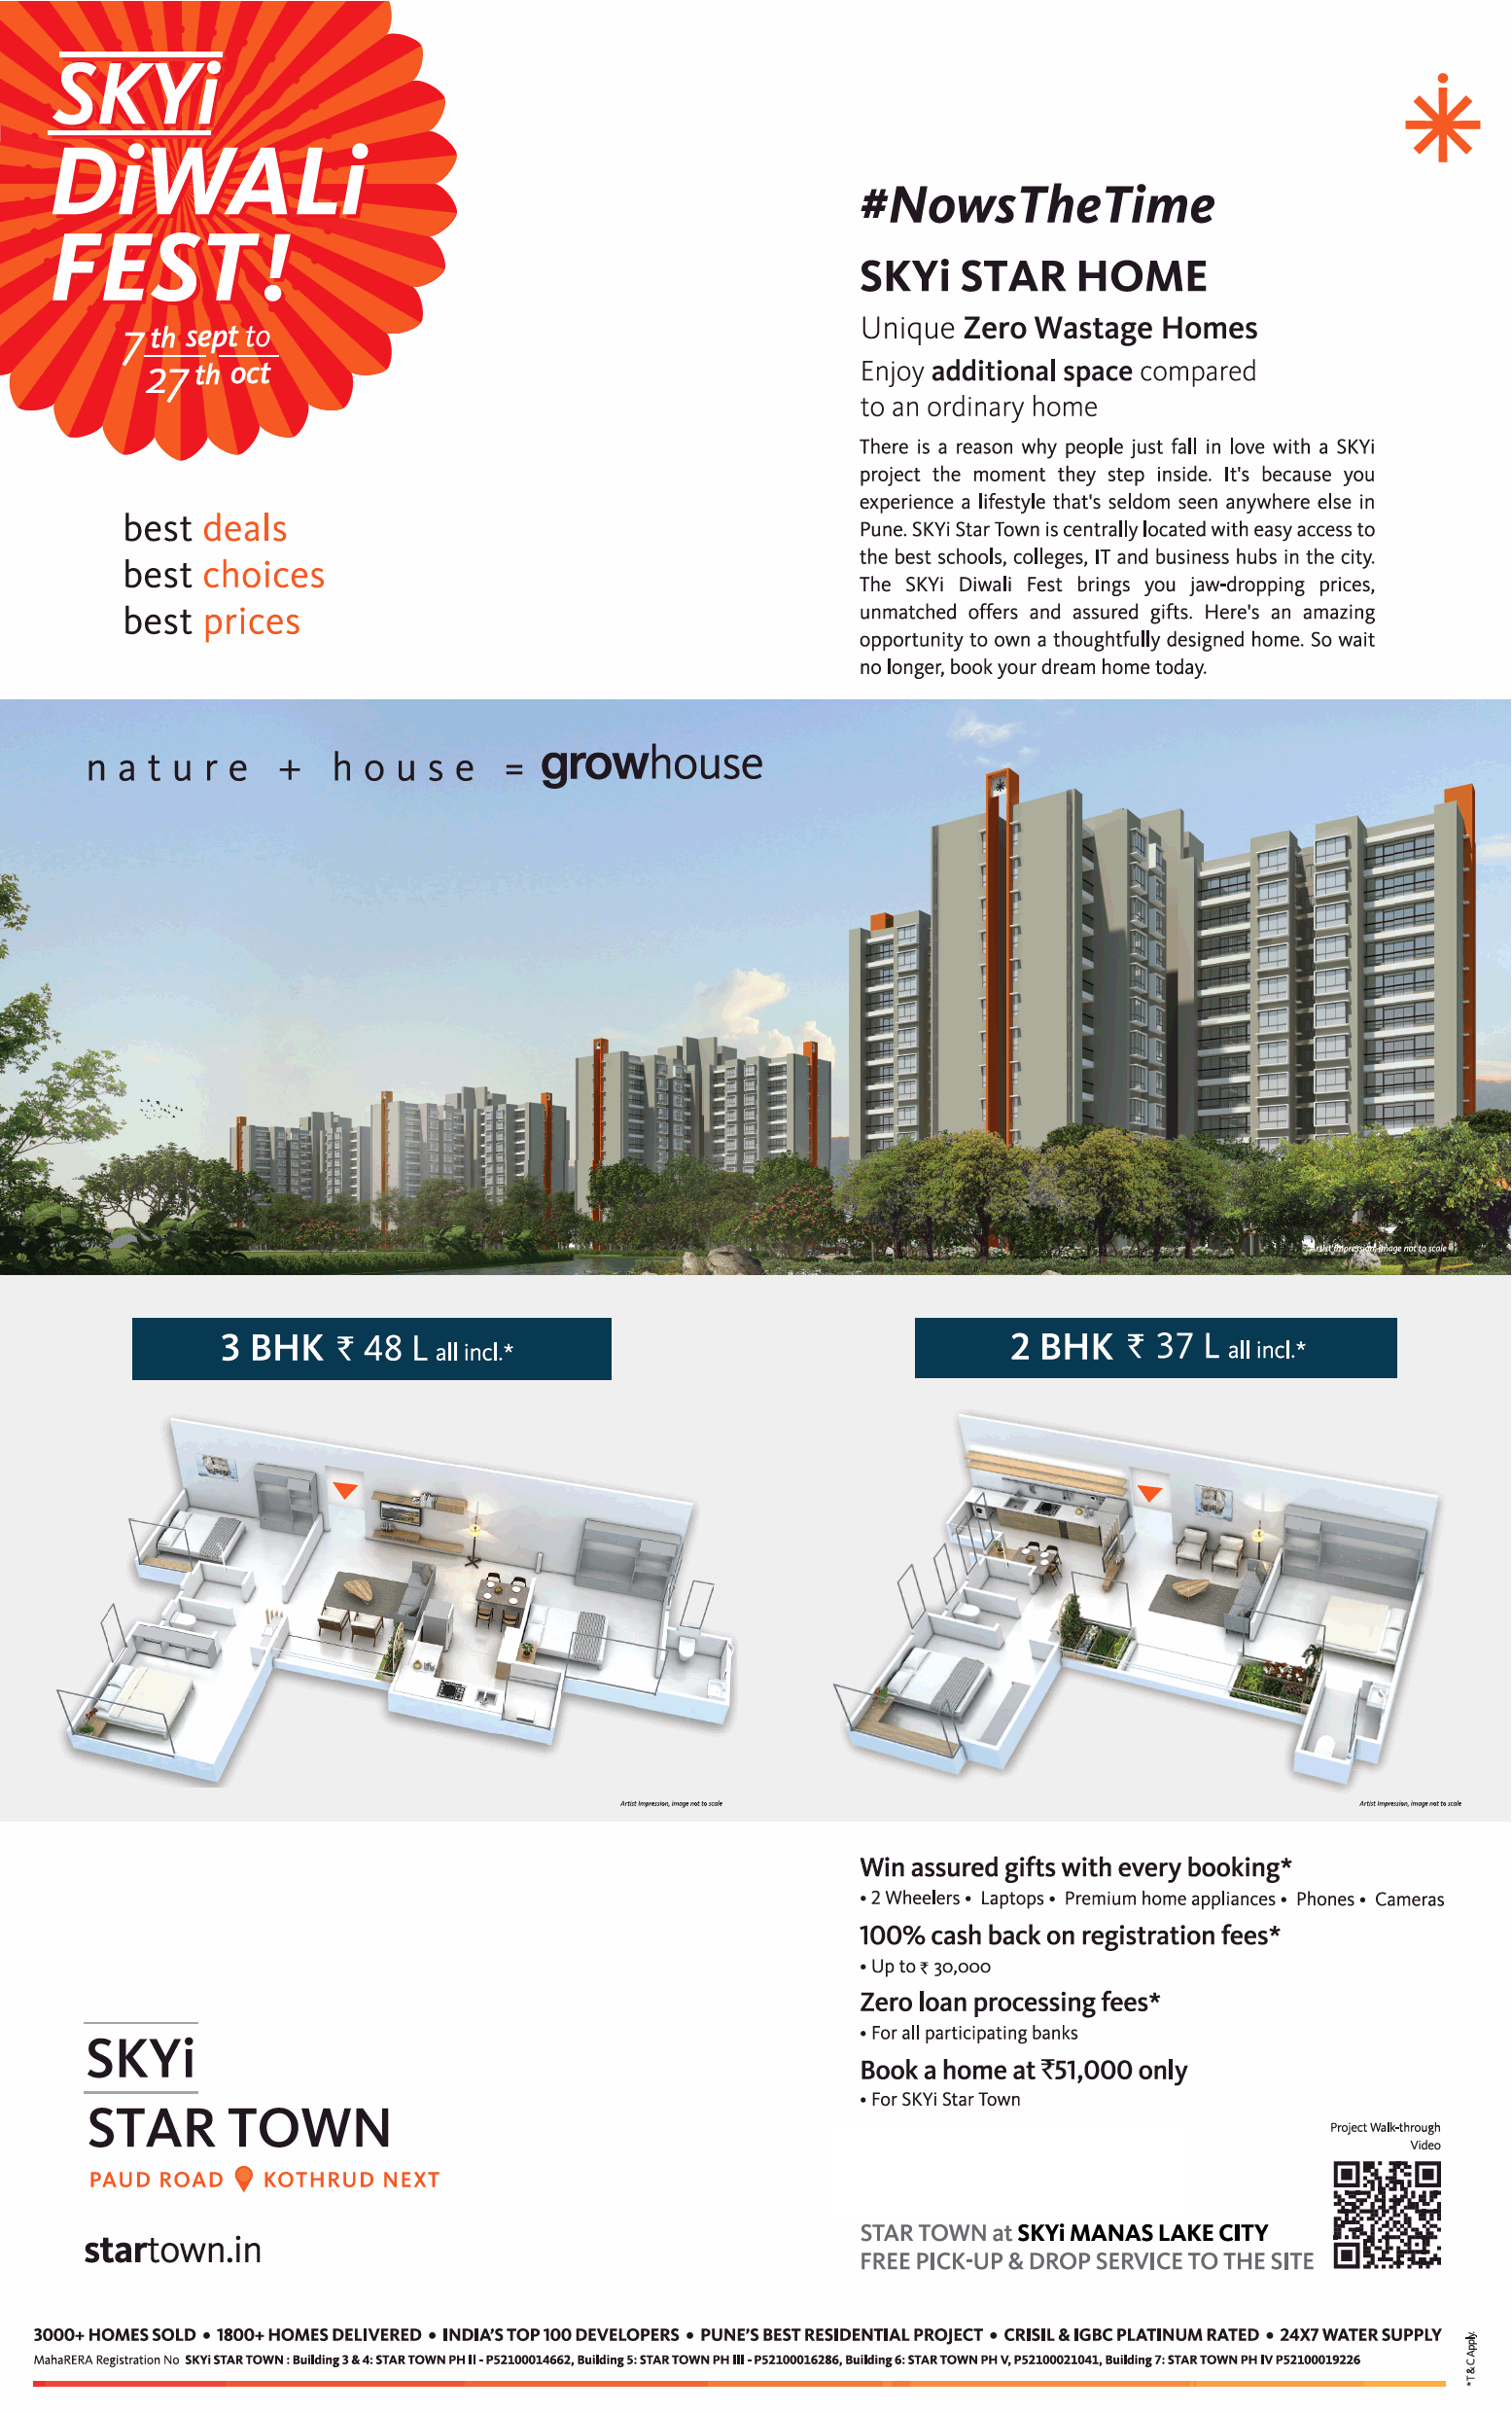 Book 3 BHK Rs 48 lakh at SKYi Star Home, Pune Update